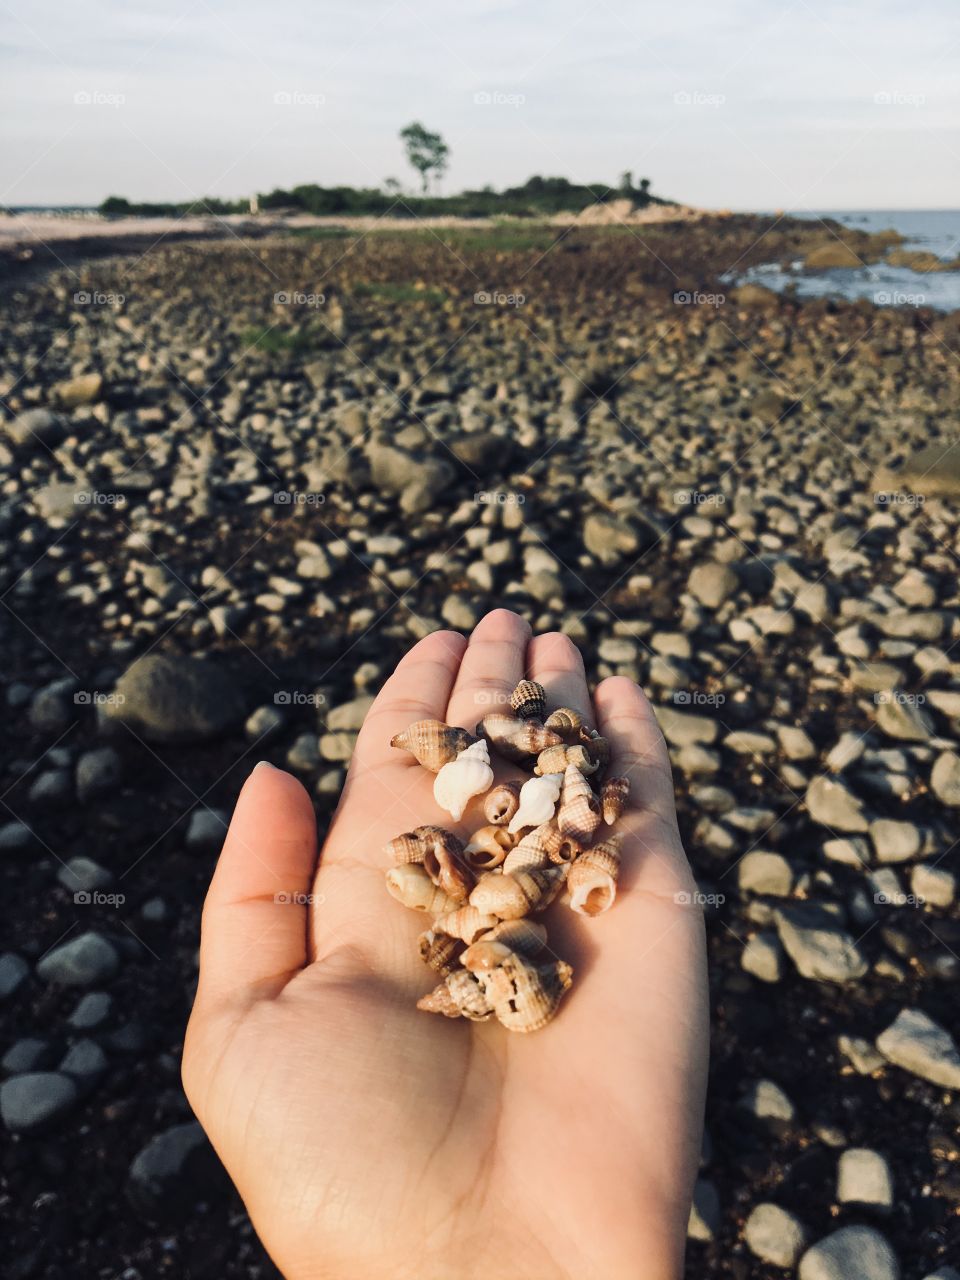 Collecting seashells by the seashore 